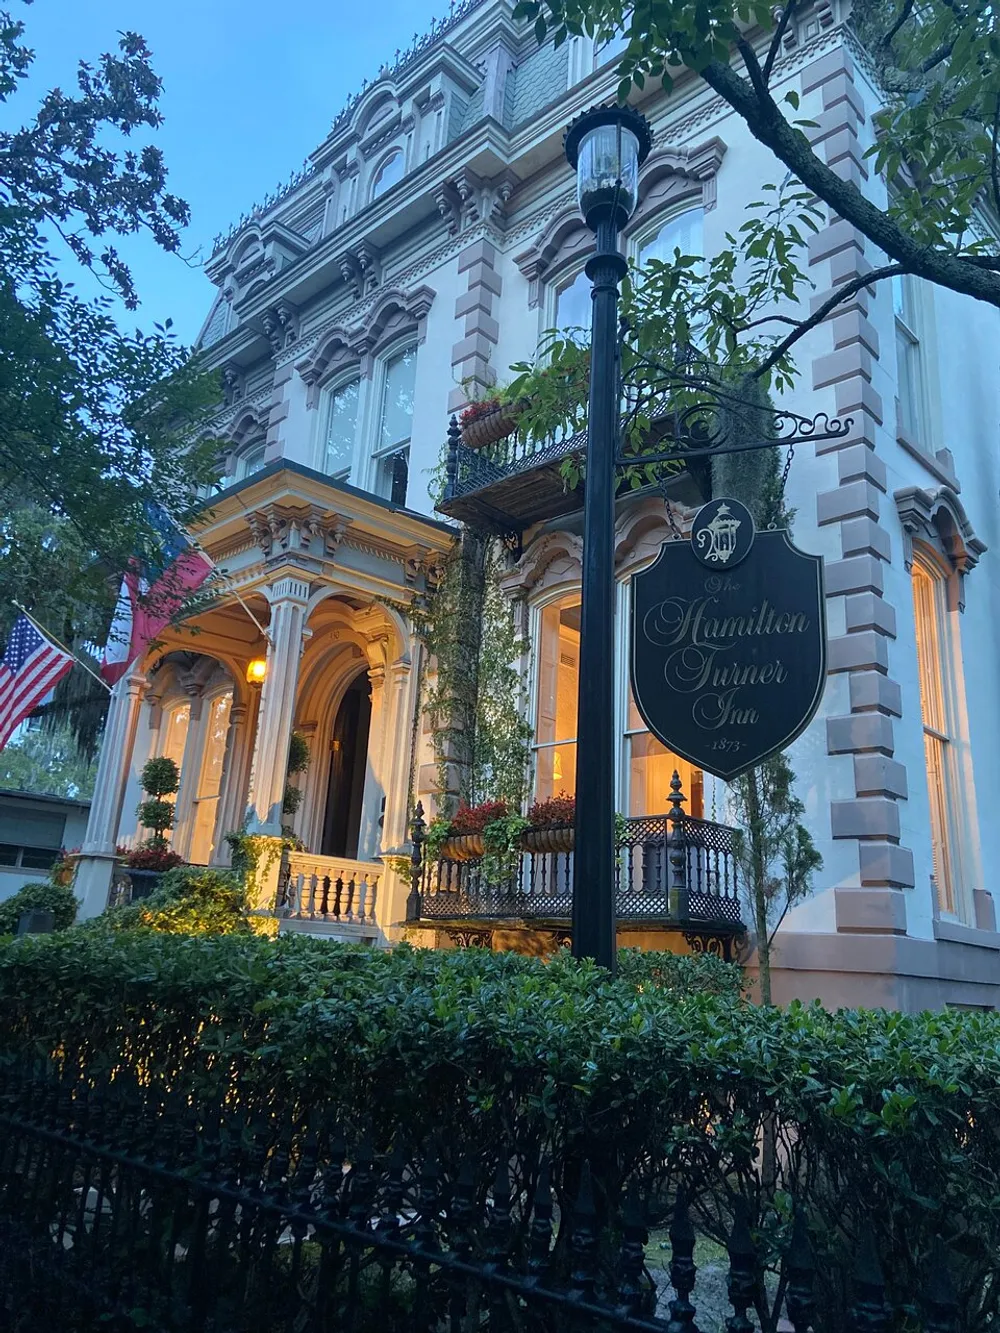 The image shows the exterior of the Hamilton-Turner Inn an elegant historic building adorned with an American flag at twilight with external lighting illuminating the structures detailed architecture